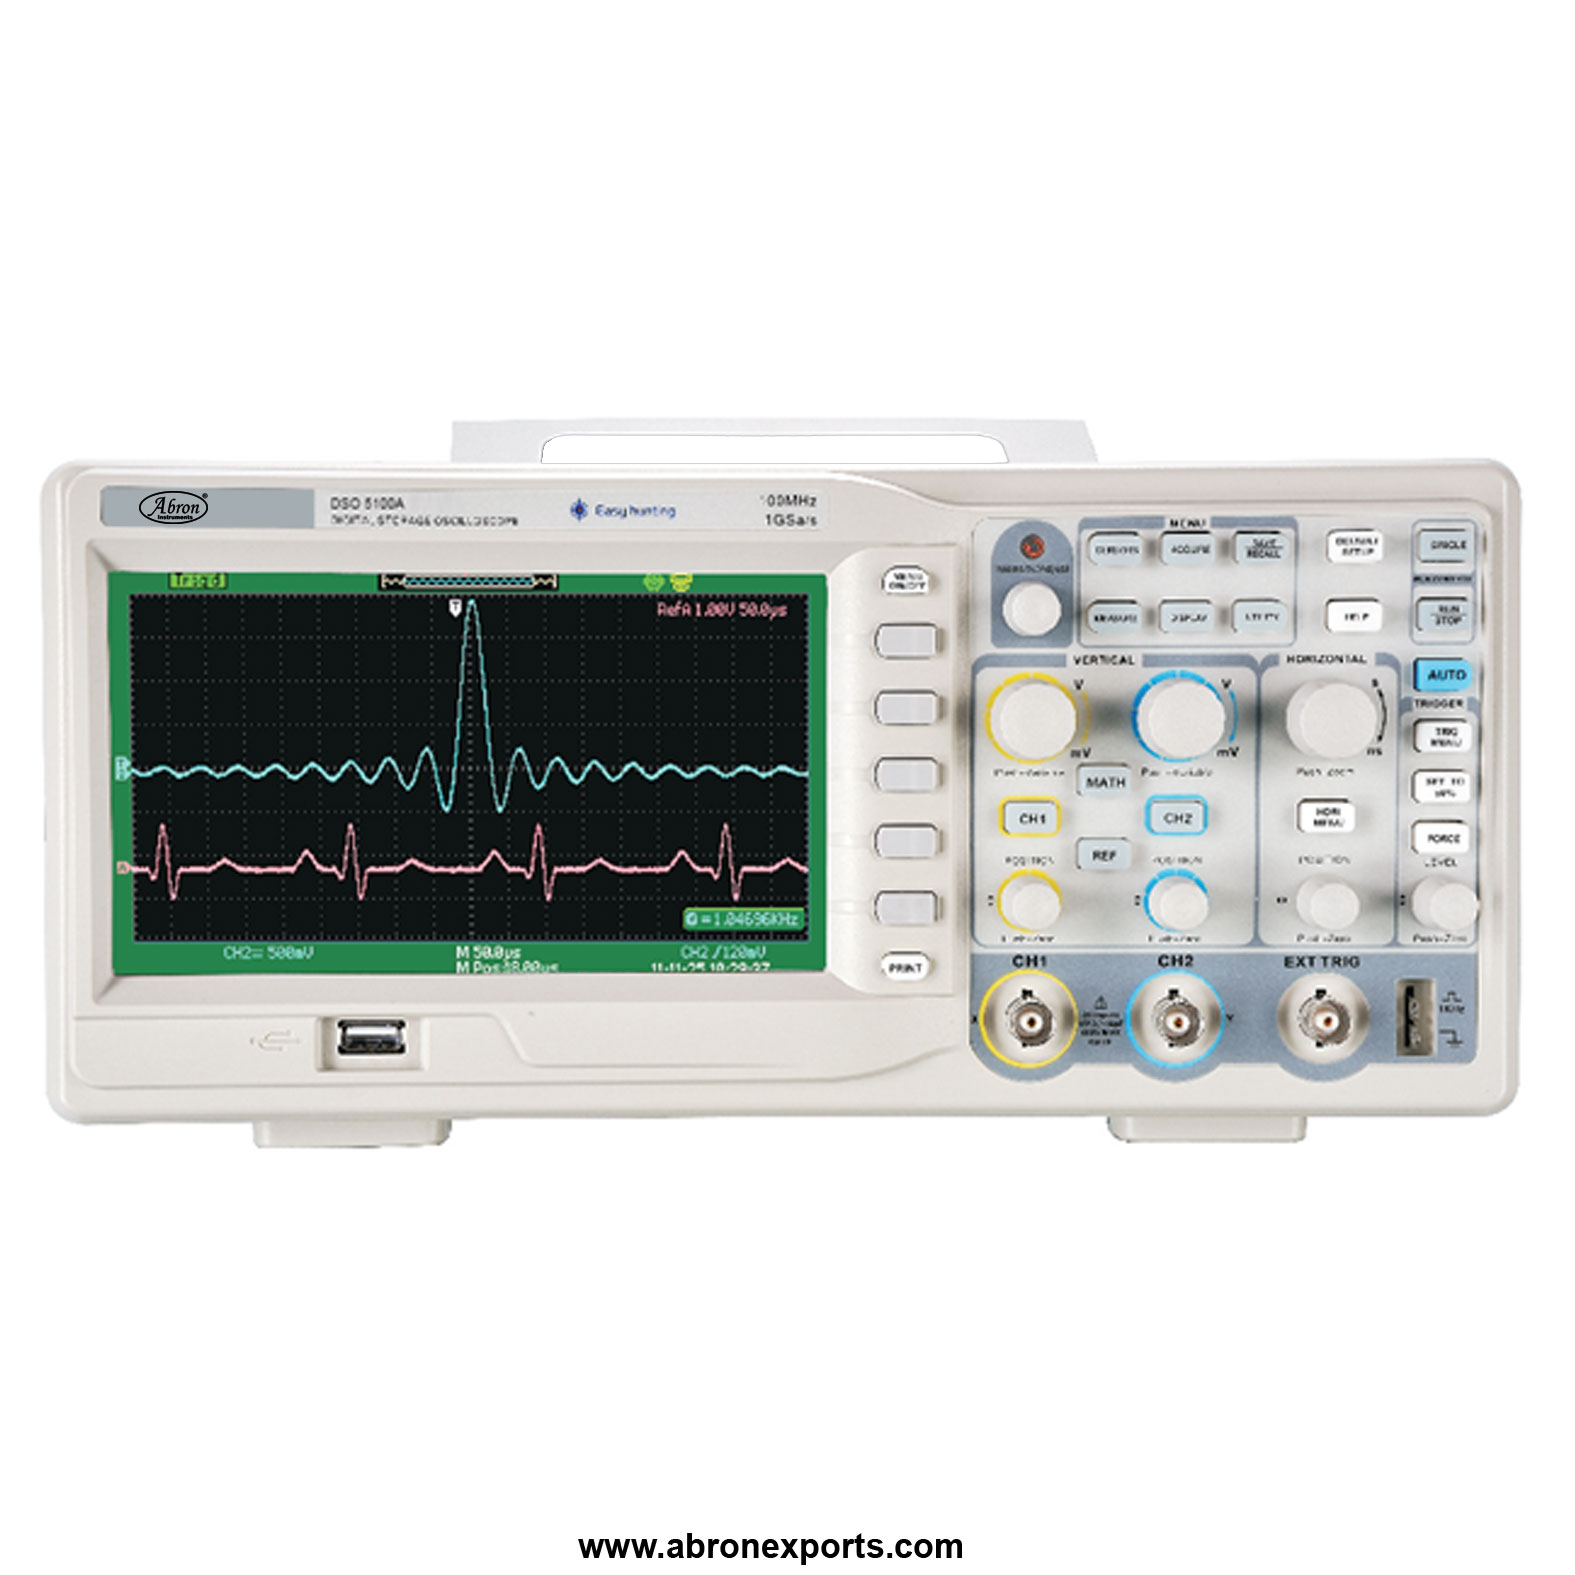 Cro Oscilloscope digital storage100mhz 8 inch color tft lcd screen 2 channel 6digit frequency counter abron AE-1344D1H8